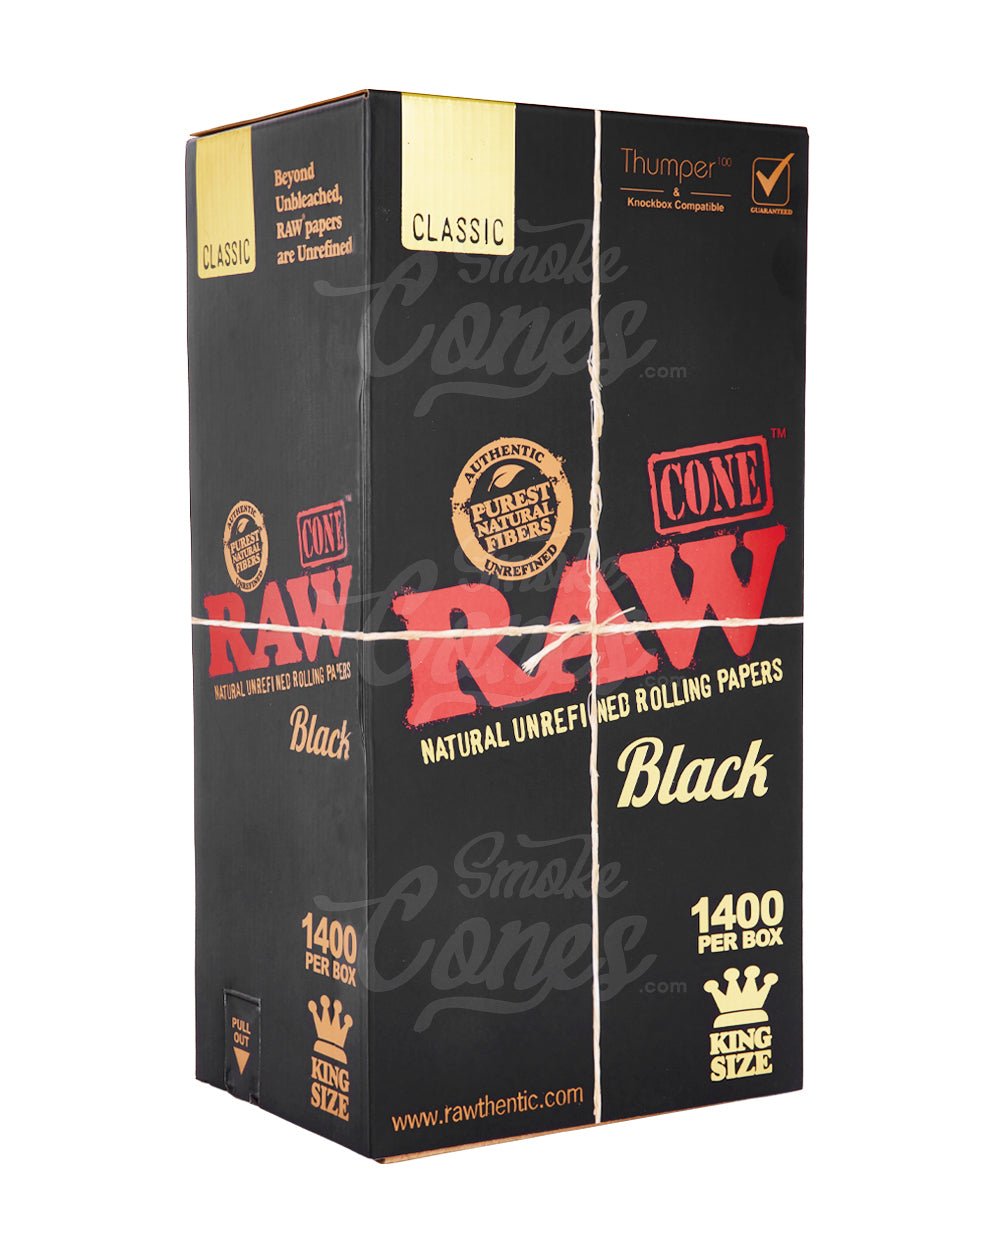 RAW Classic 1 1/4 Size 84mm Pre Rolled Unbleached Paper Cones 1000/Box